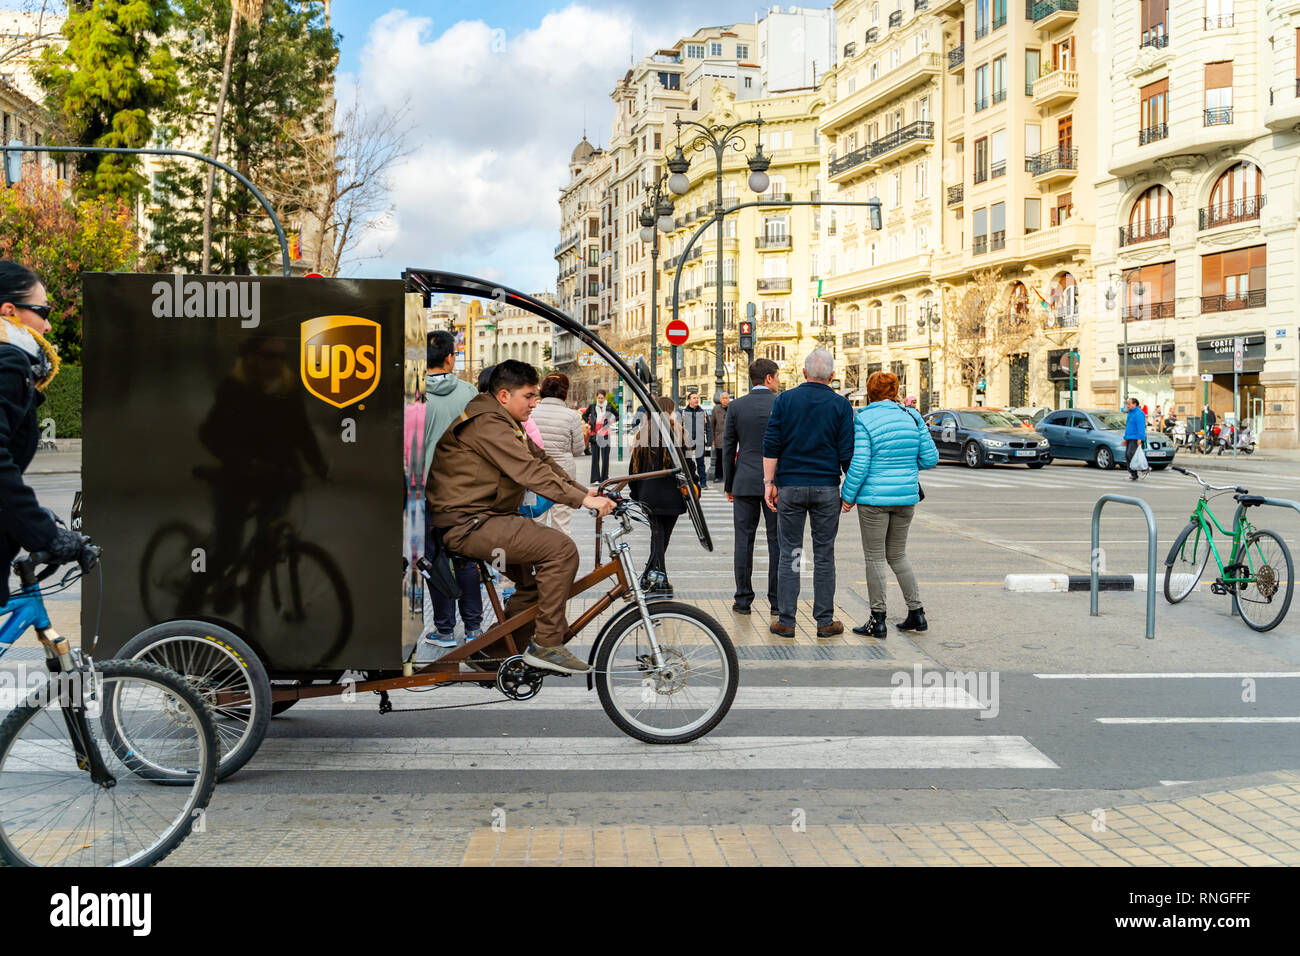 Valencia,Spain - February 18, 2019: UPS worker on the bicycle. Non  contaminating vehicle, corrier Stock Photo - Alamy